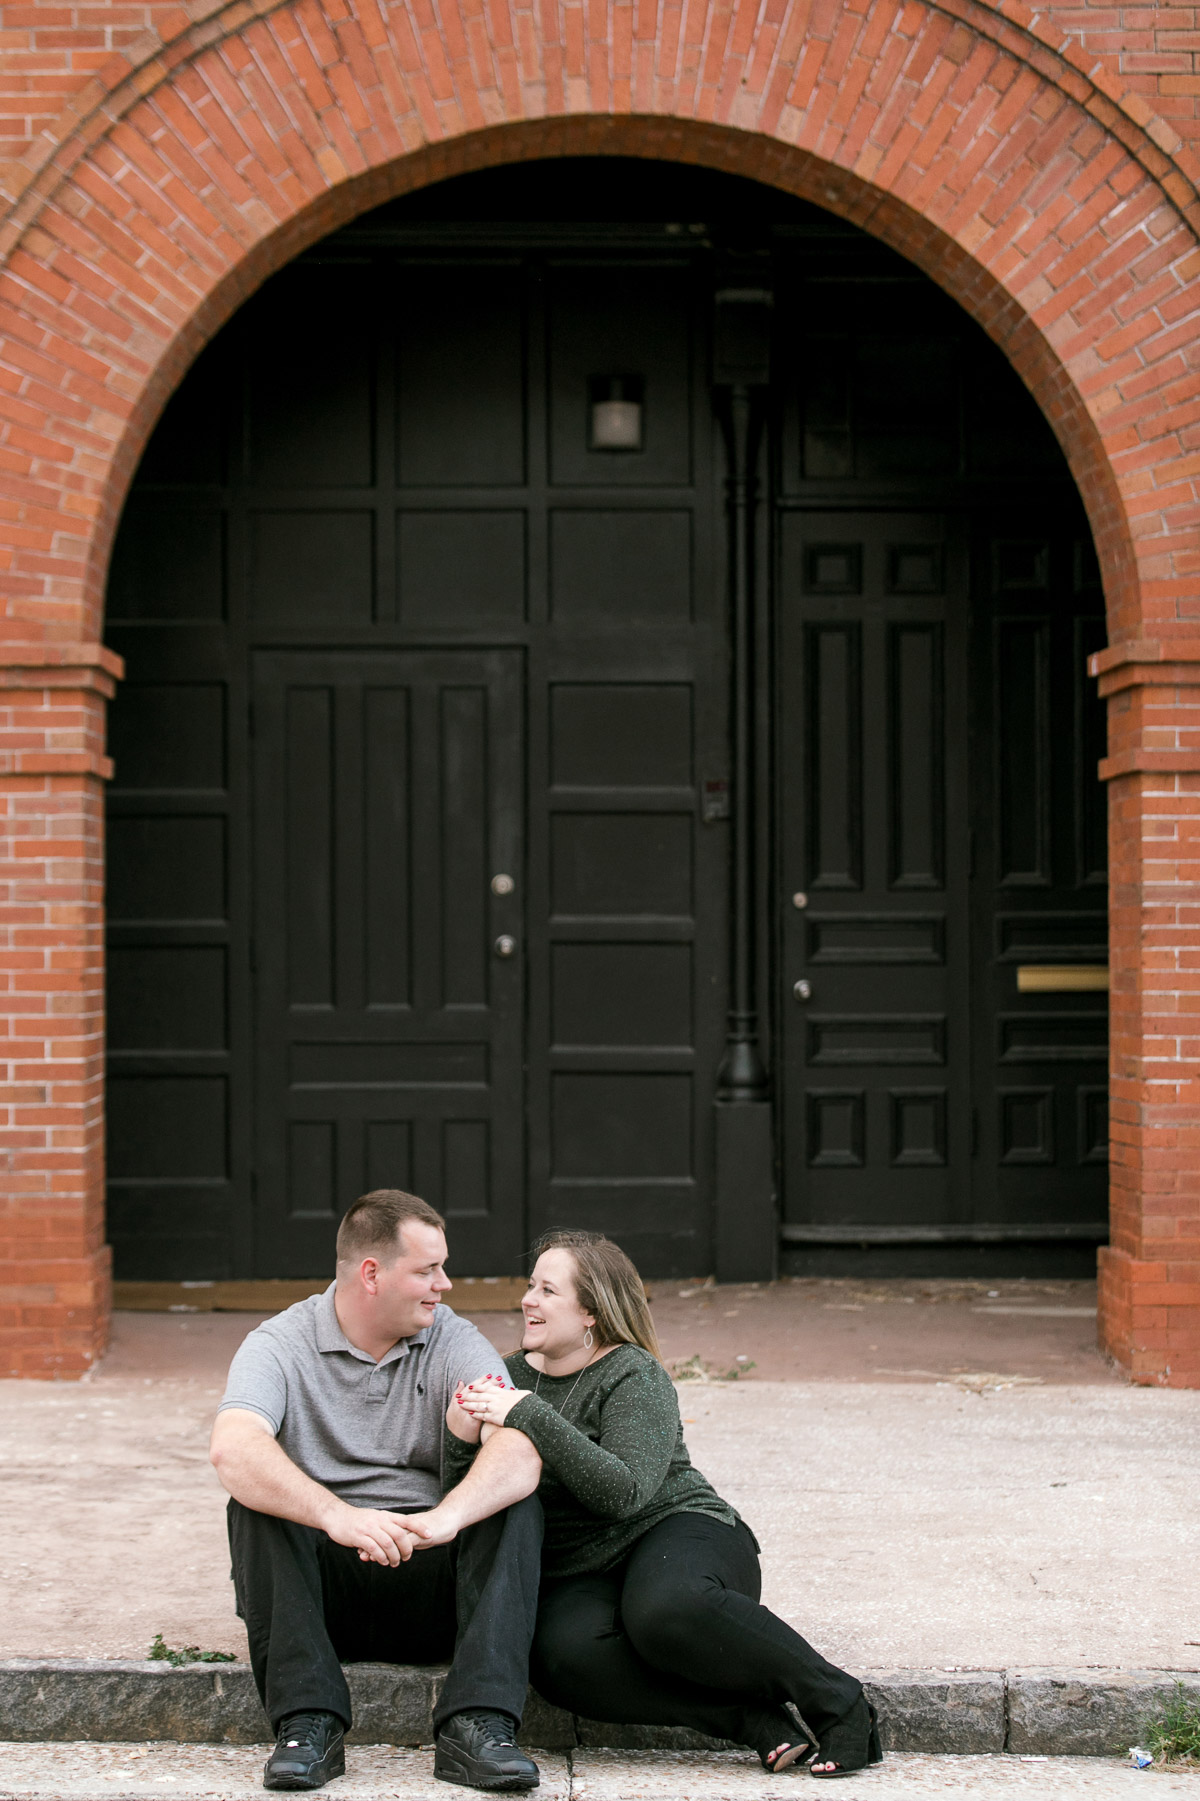 Couple sitting and laughing on a curb in front of historic brick building